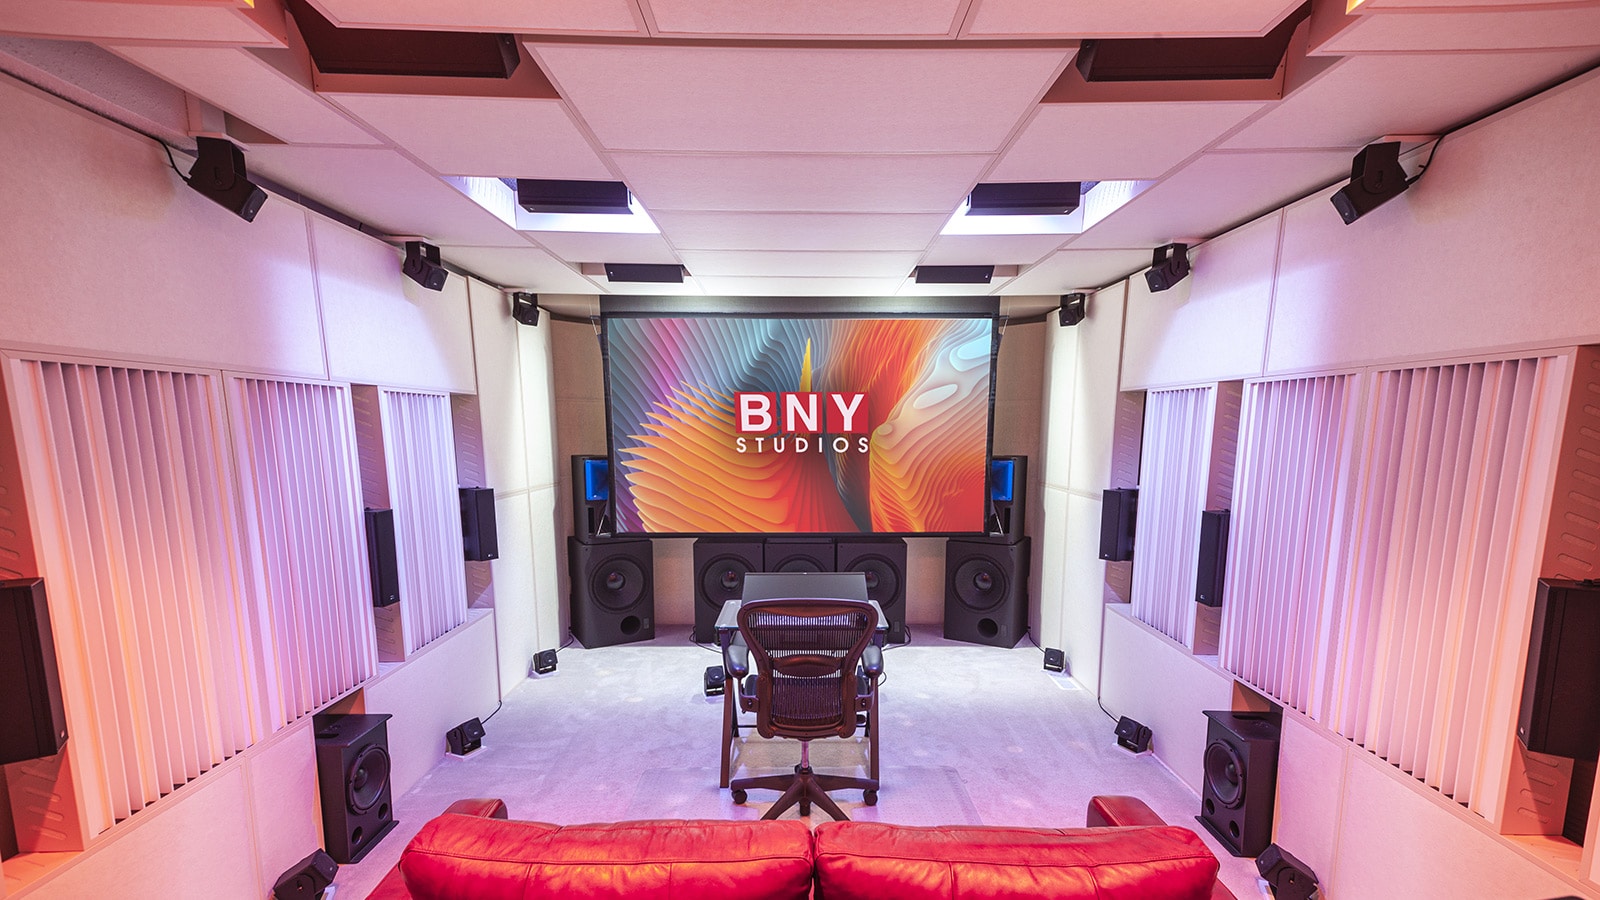 Meyer Sound Bluehorn System Provides BNY Productions the Accuracy to Deliver Remote Events for 2020 USA Election Season